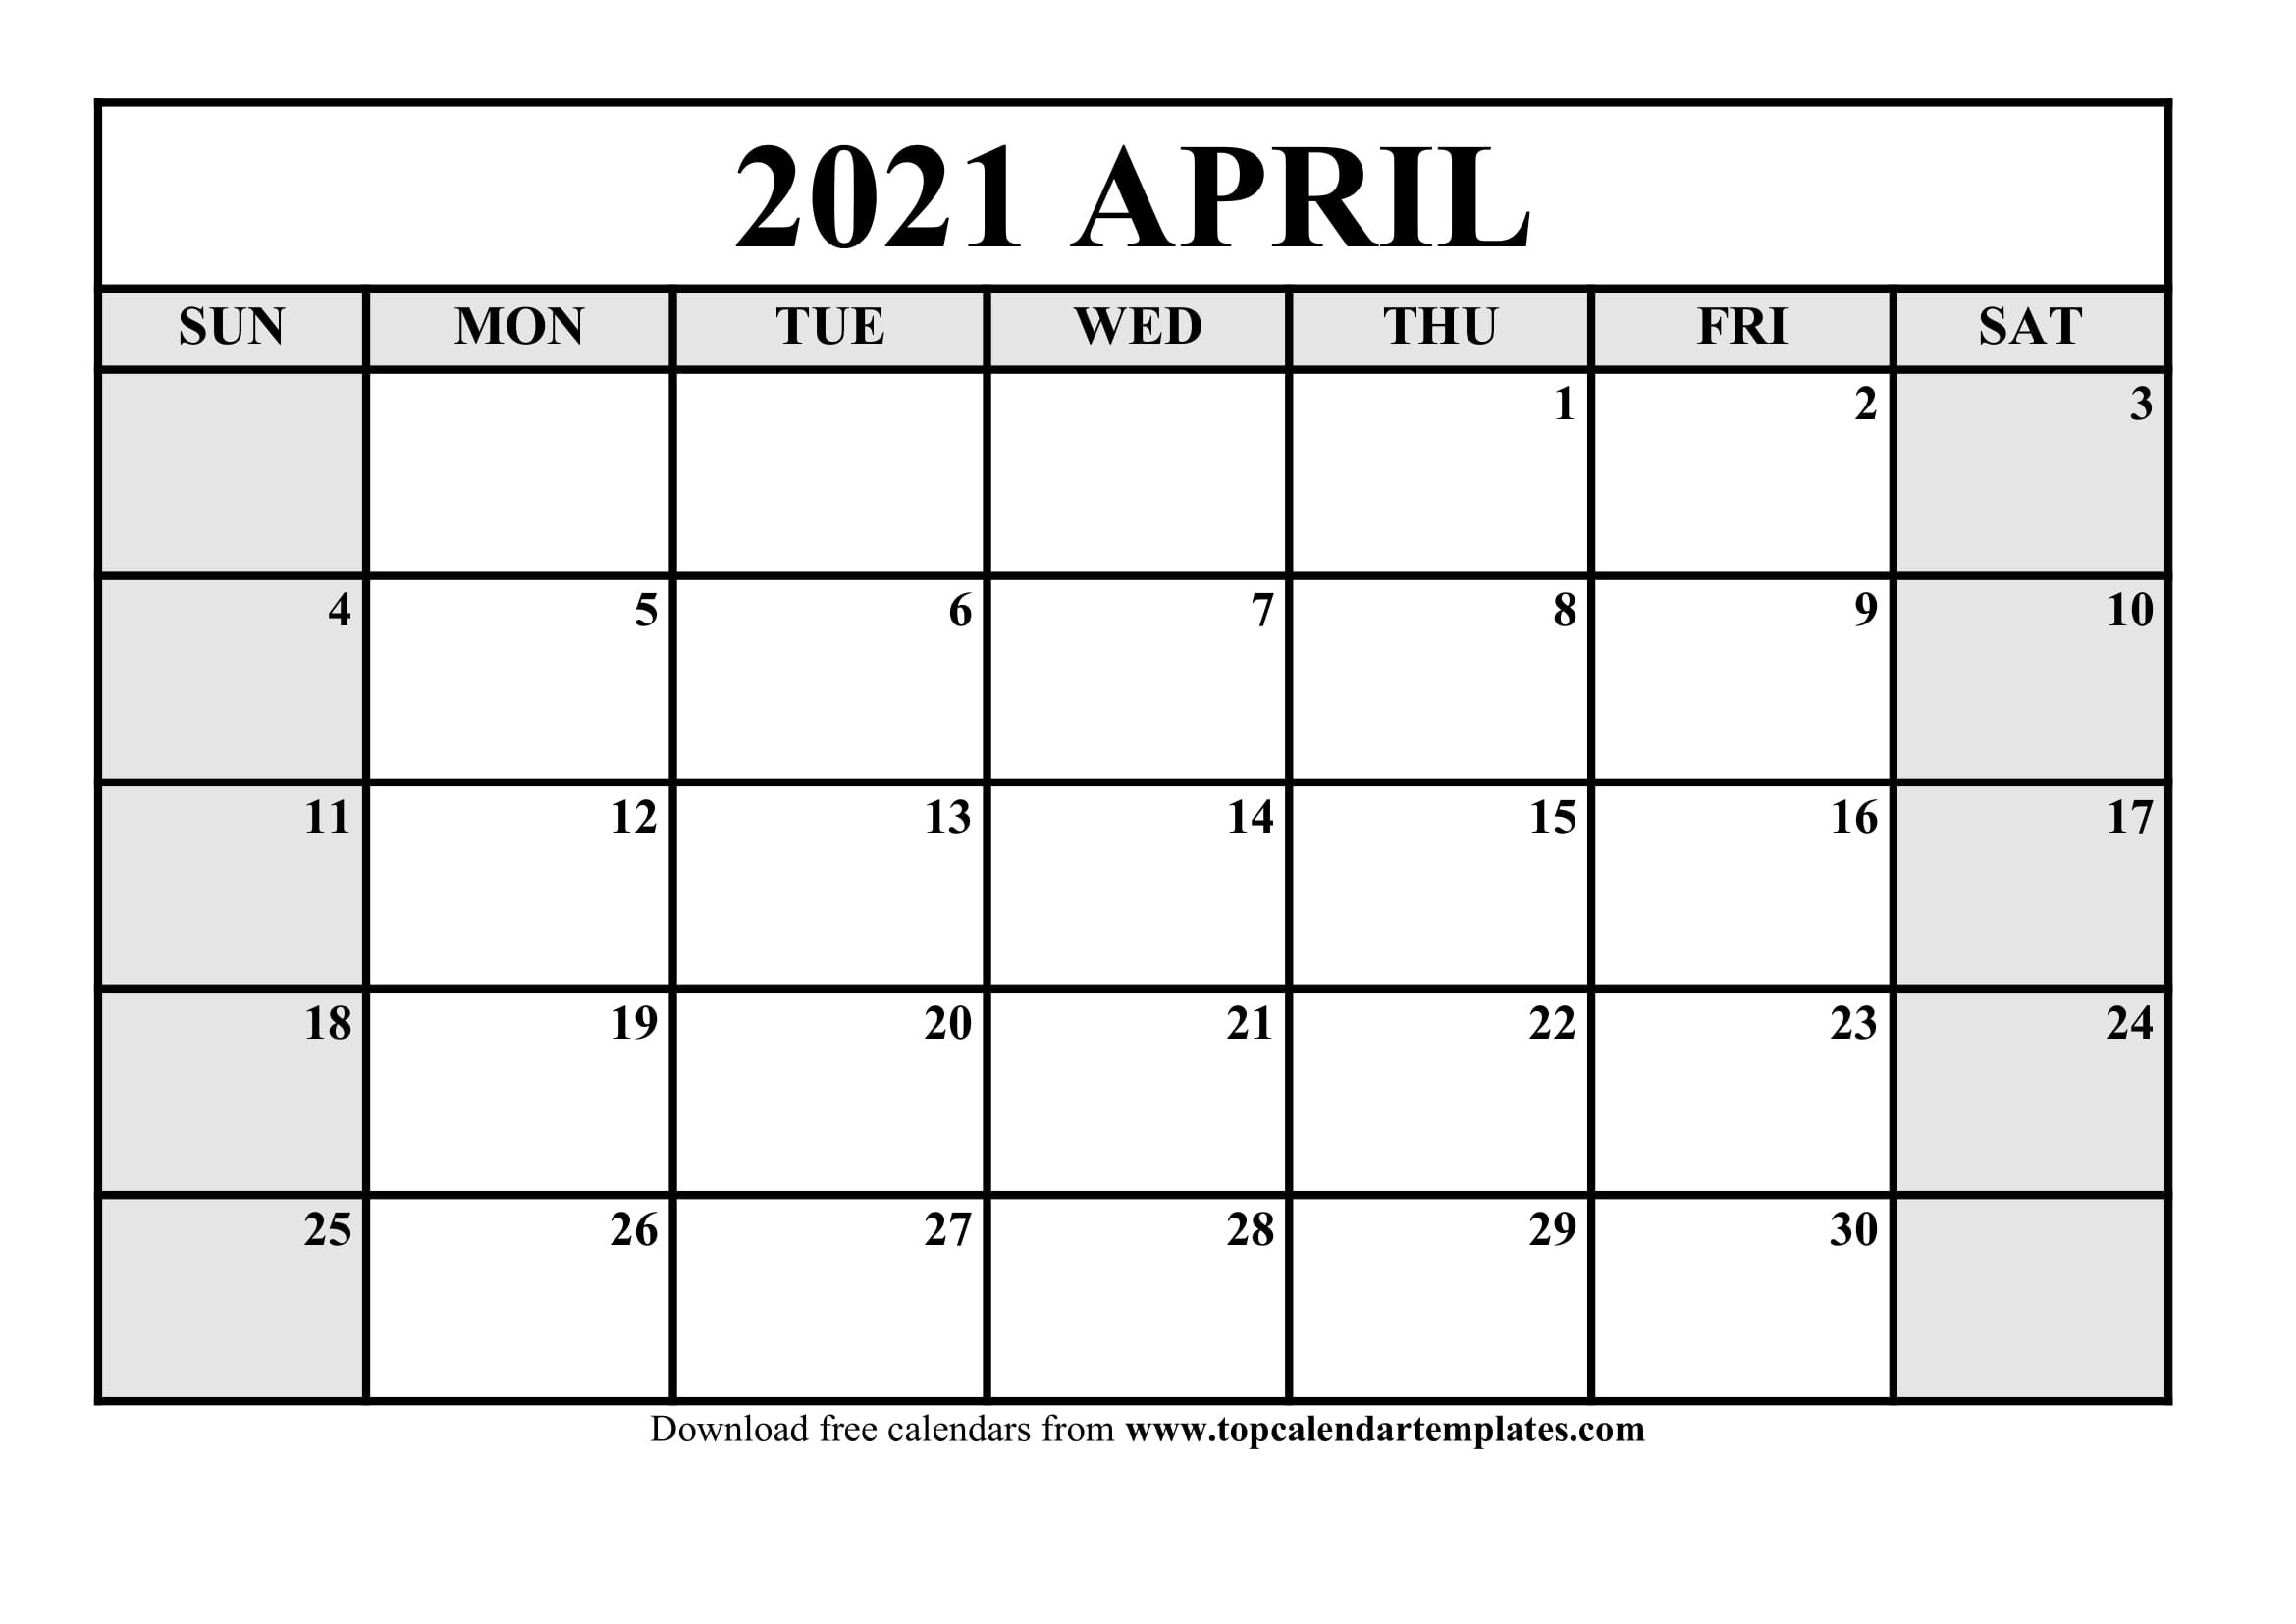 Free April 2021 Calendar Printable - Monthly Template-Free Printable Monthly Calendar 2021